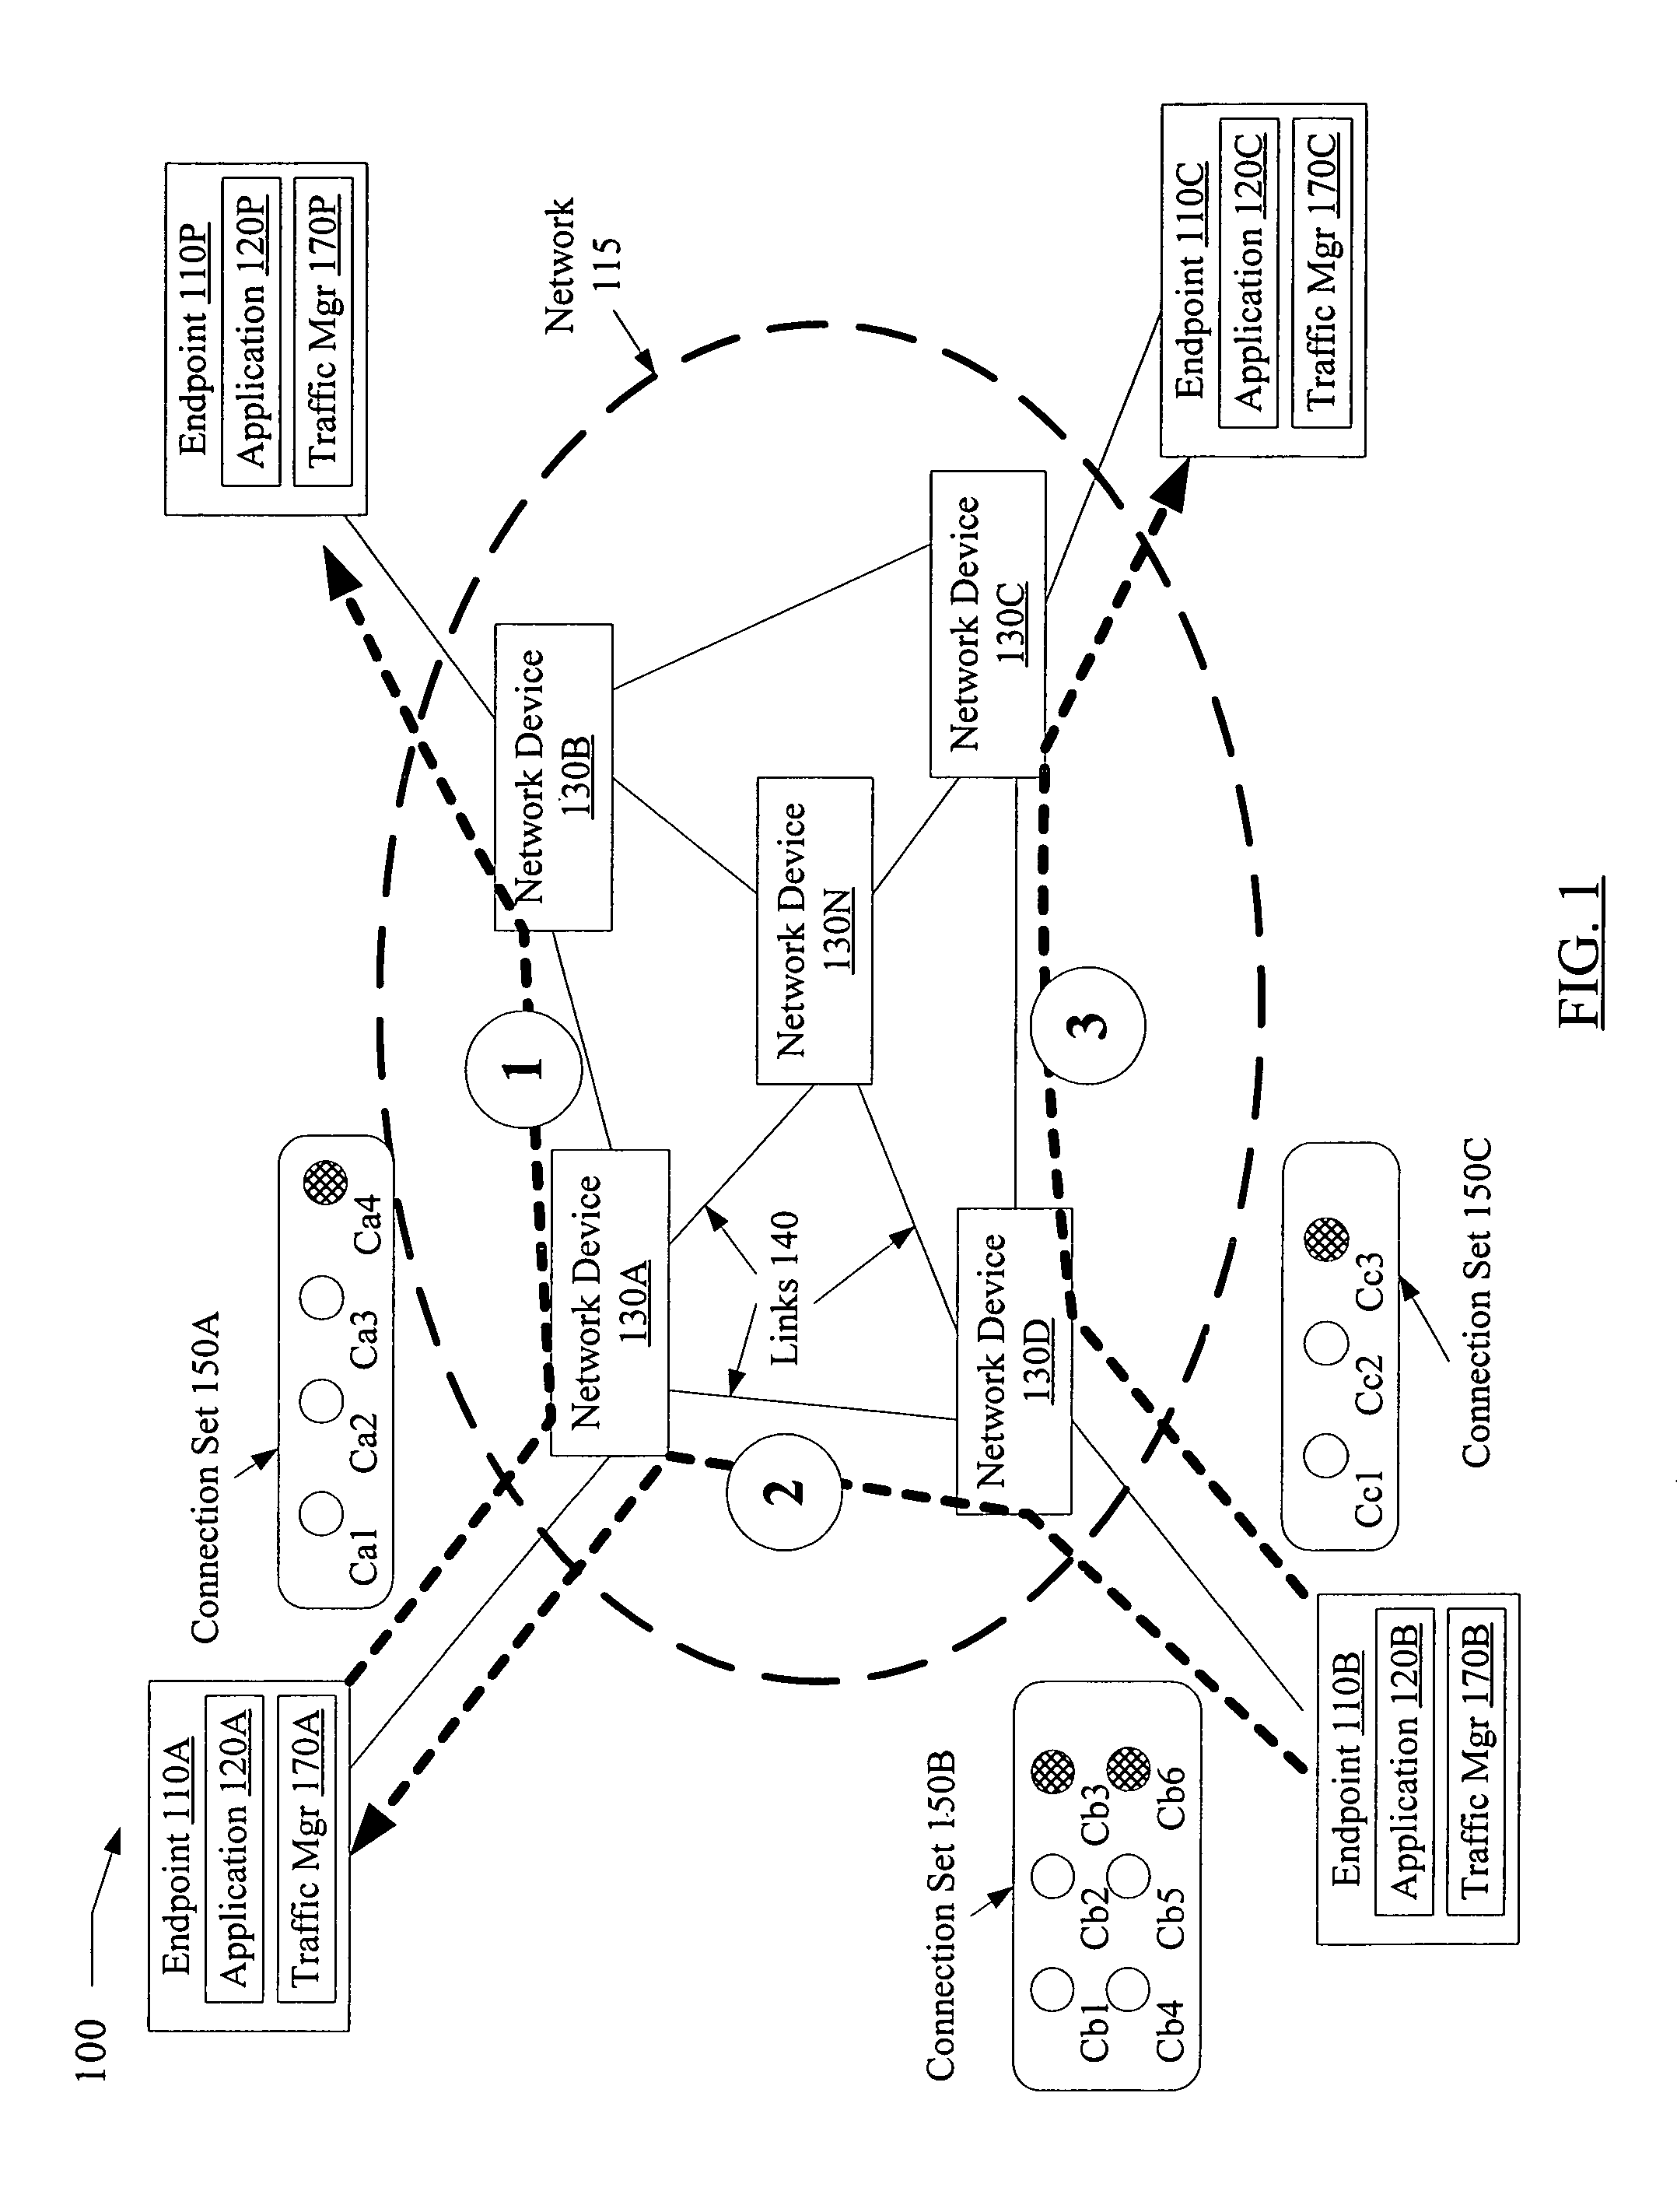 Bulk network transmissions using multiple connections primed to optimize transfer parameters